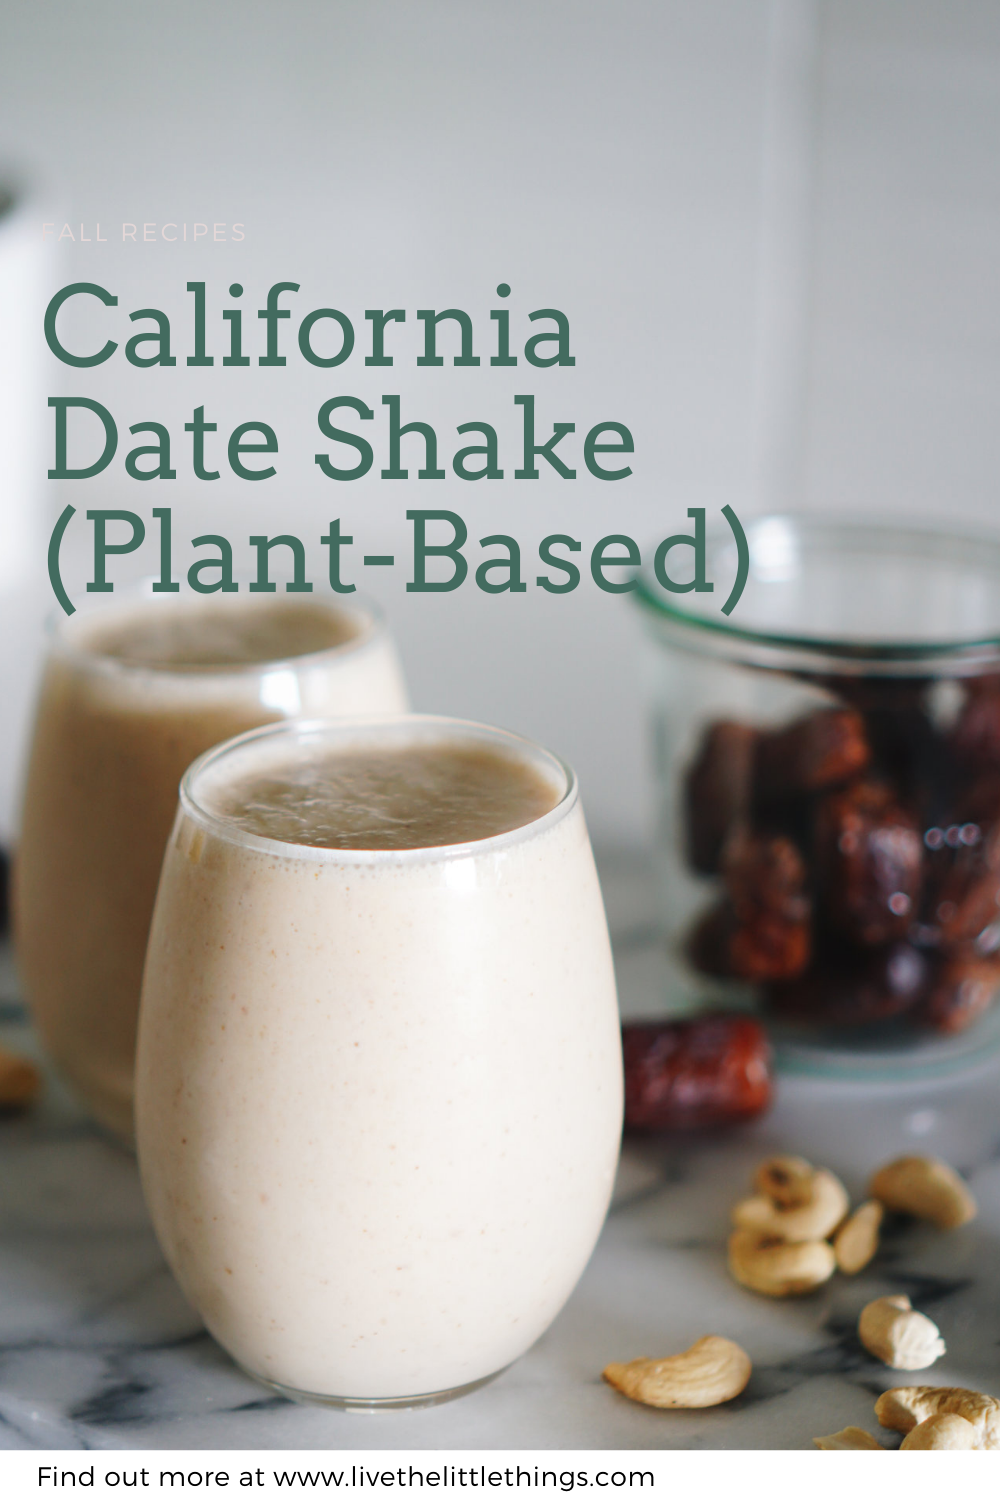 California+Date+Shake+Plant-Based+-+wholesome%2C+gluten-free+recipes+and+wellness+travel+guides+-+www.letsregale.com++%282%29.jpg